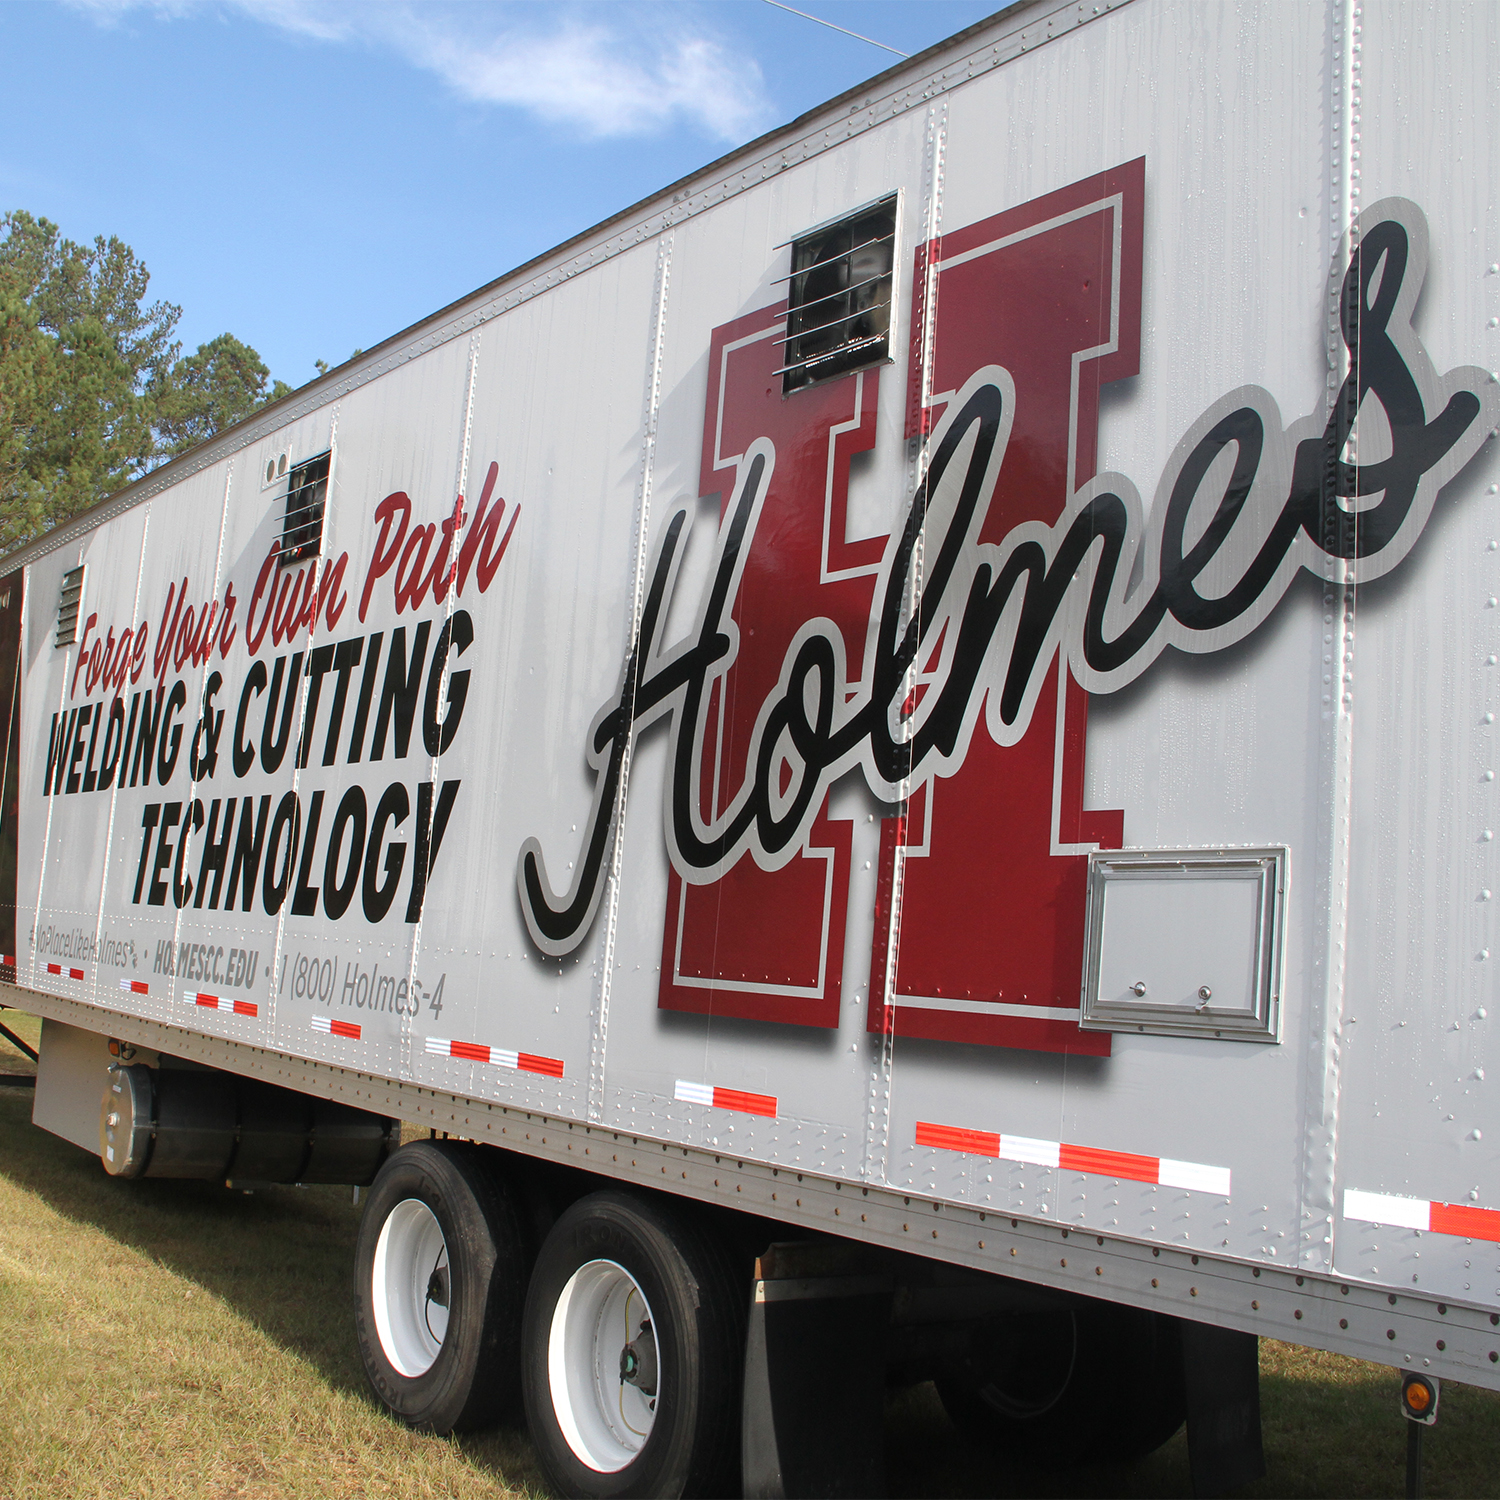 Holmes introduces new mobile welding training facility